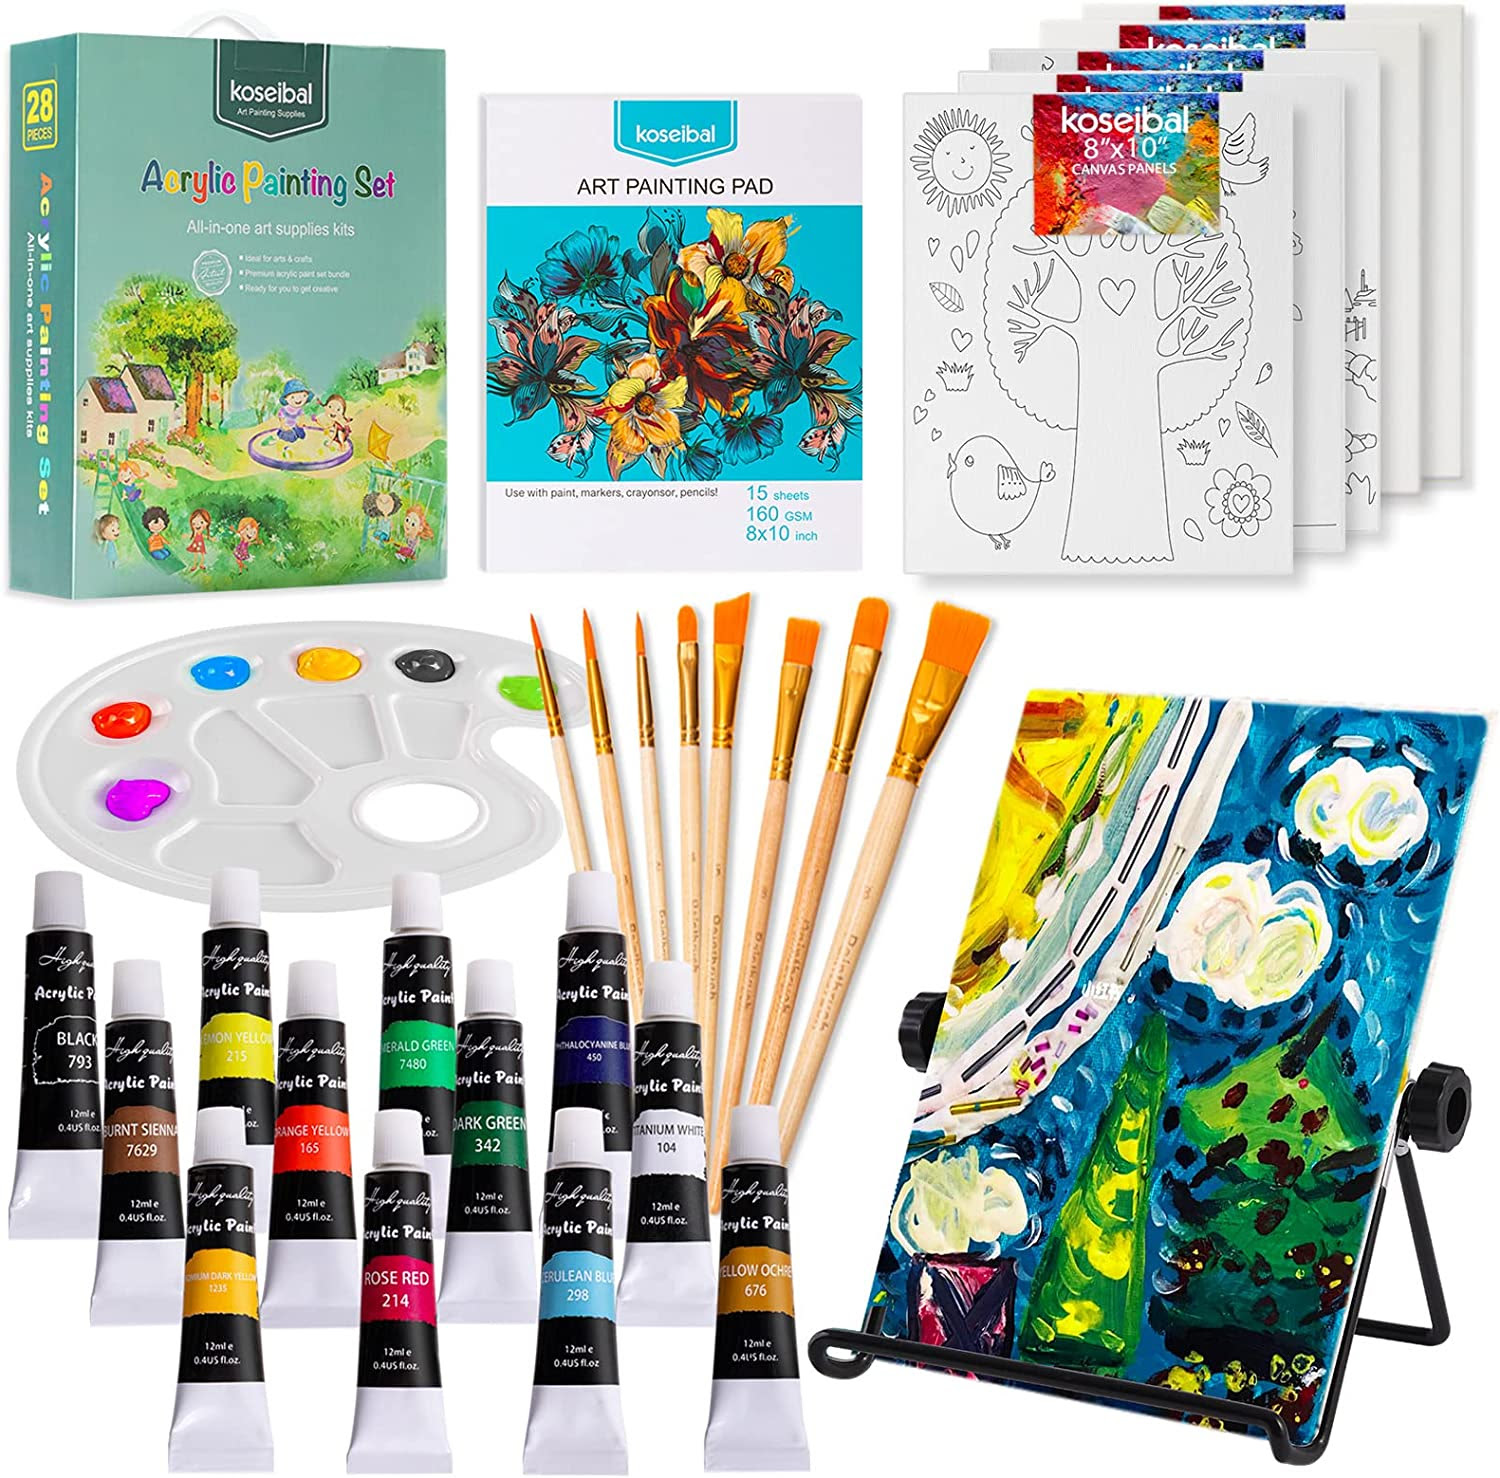 Acrylic Paint Set for Kids, Art Painting Supplies Kit                               